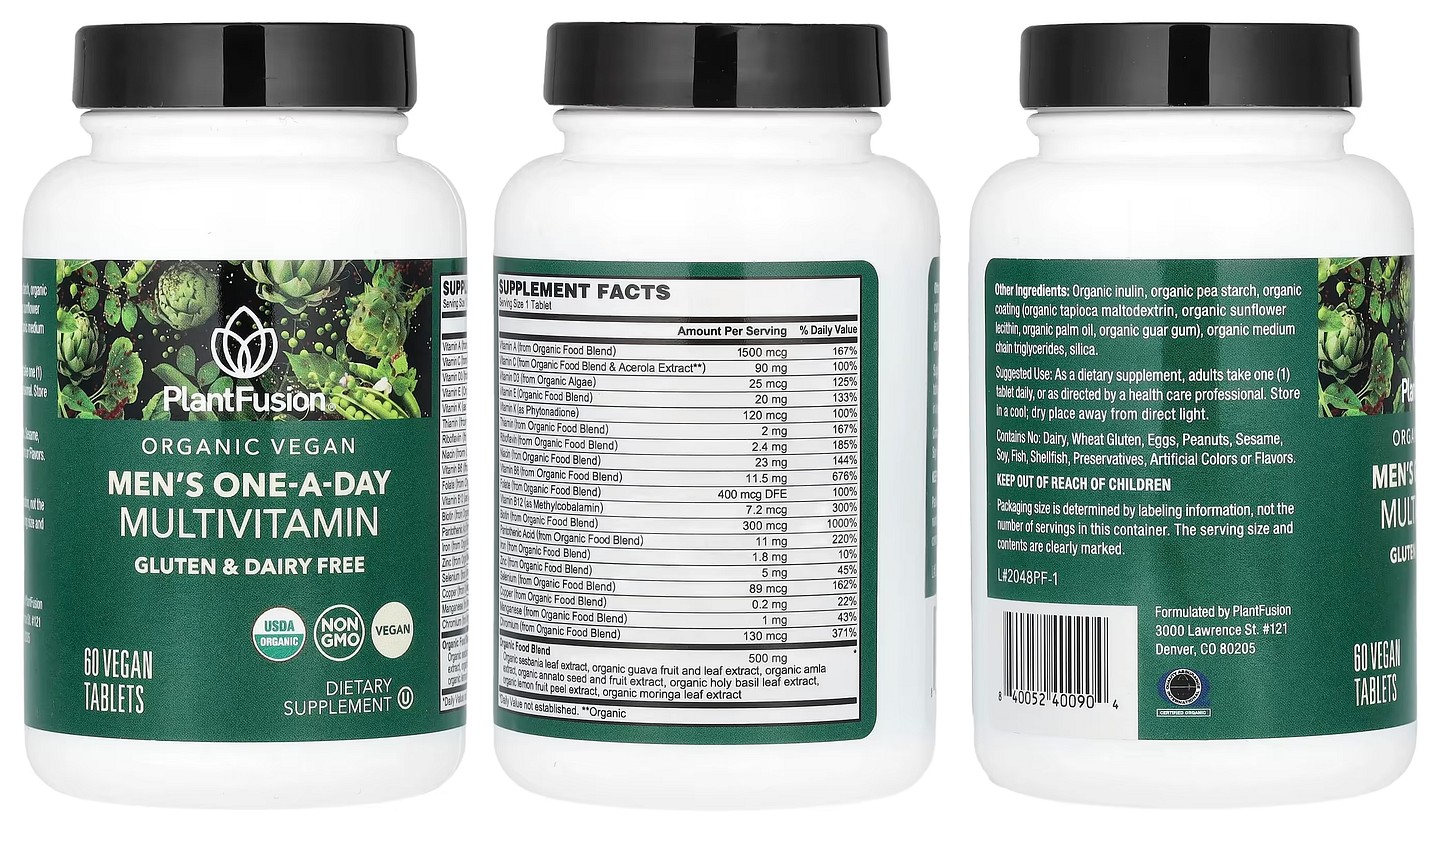 PlantFusion, Organic Vegan Men's One-a-Day Multivitamin packaging